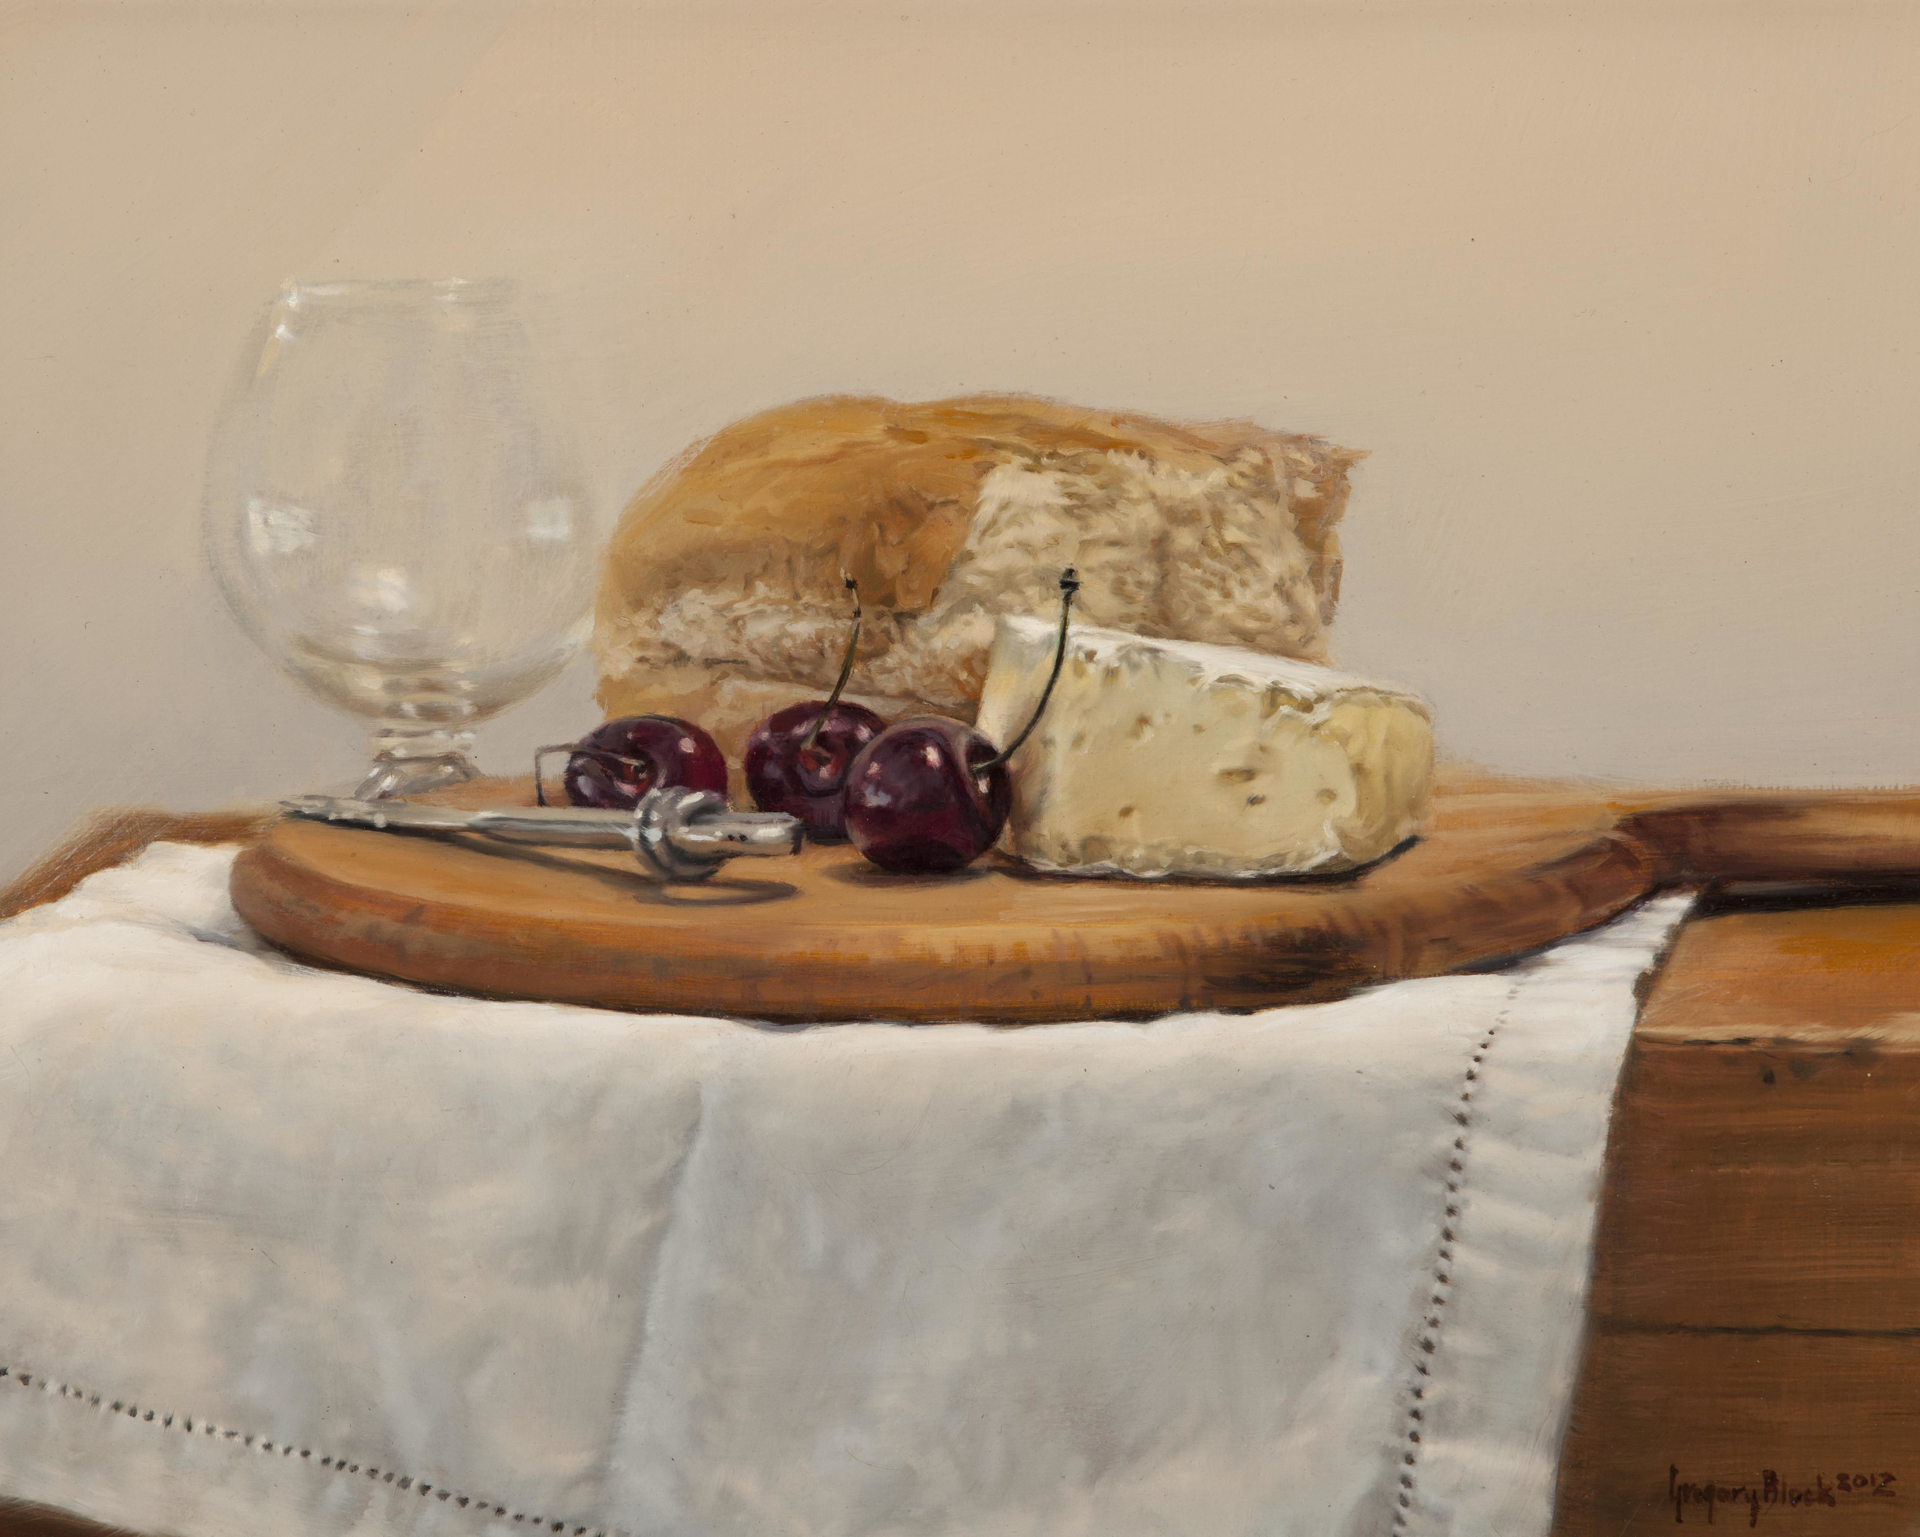 Bread, Brie, and Bings by Gregory Block